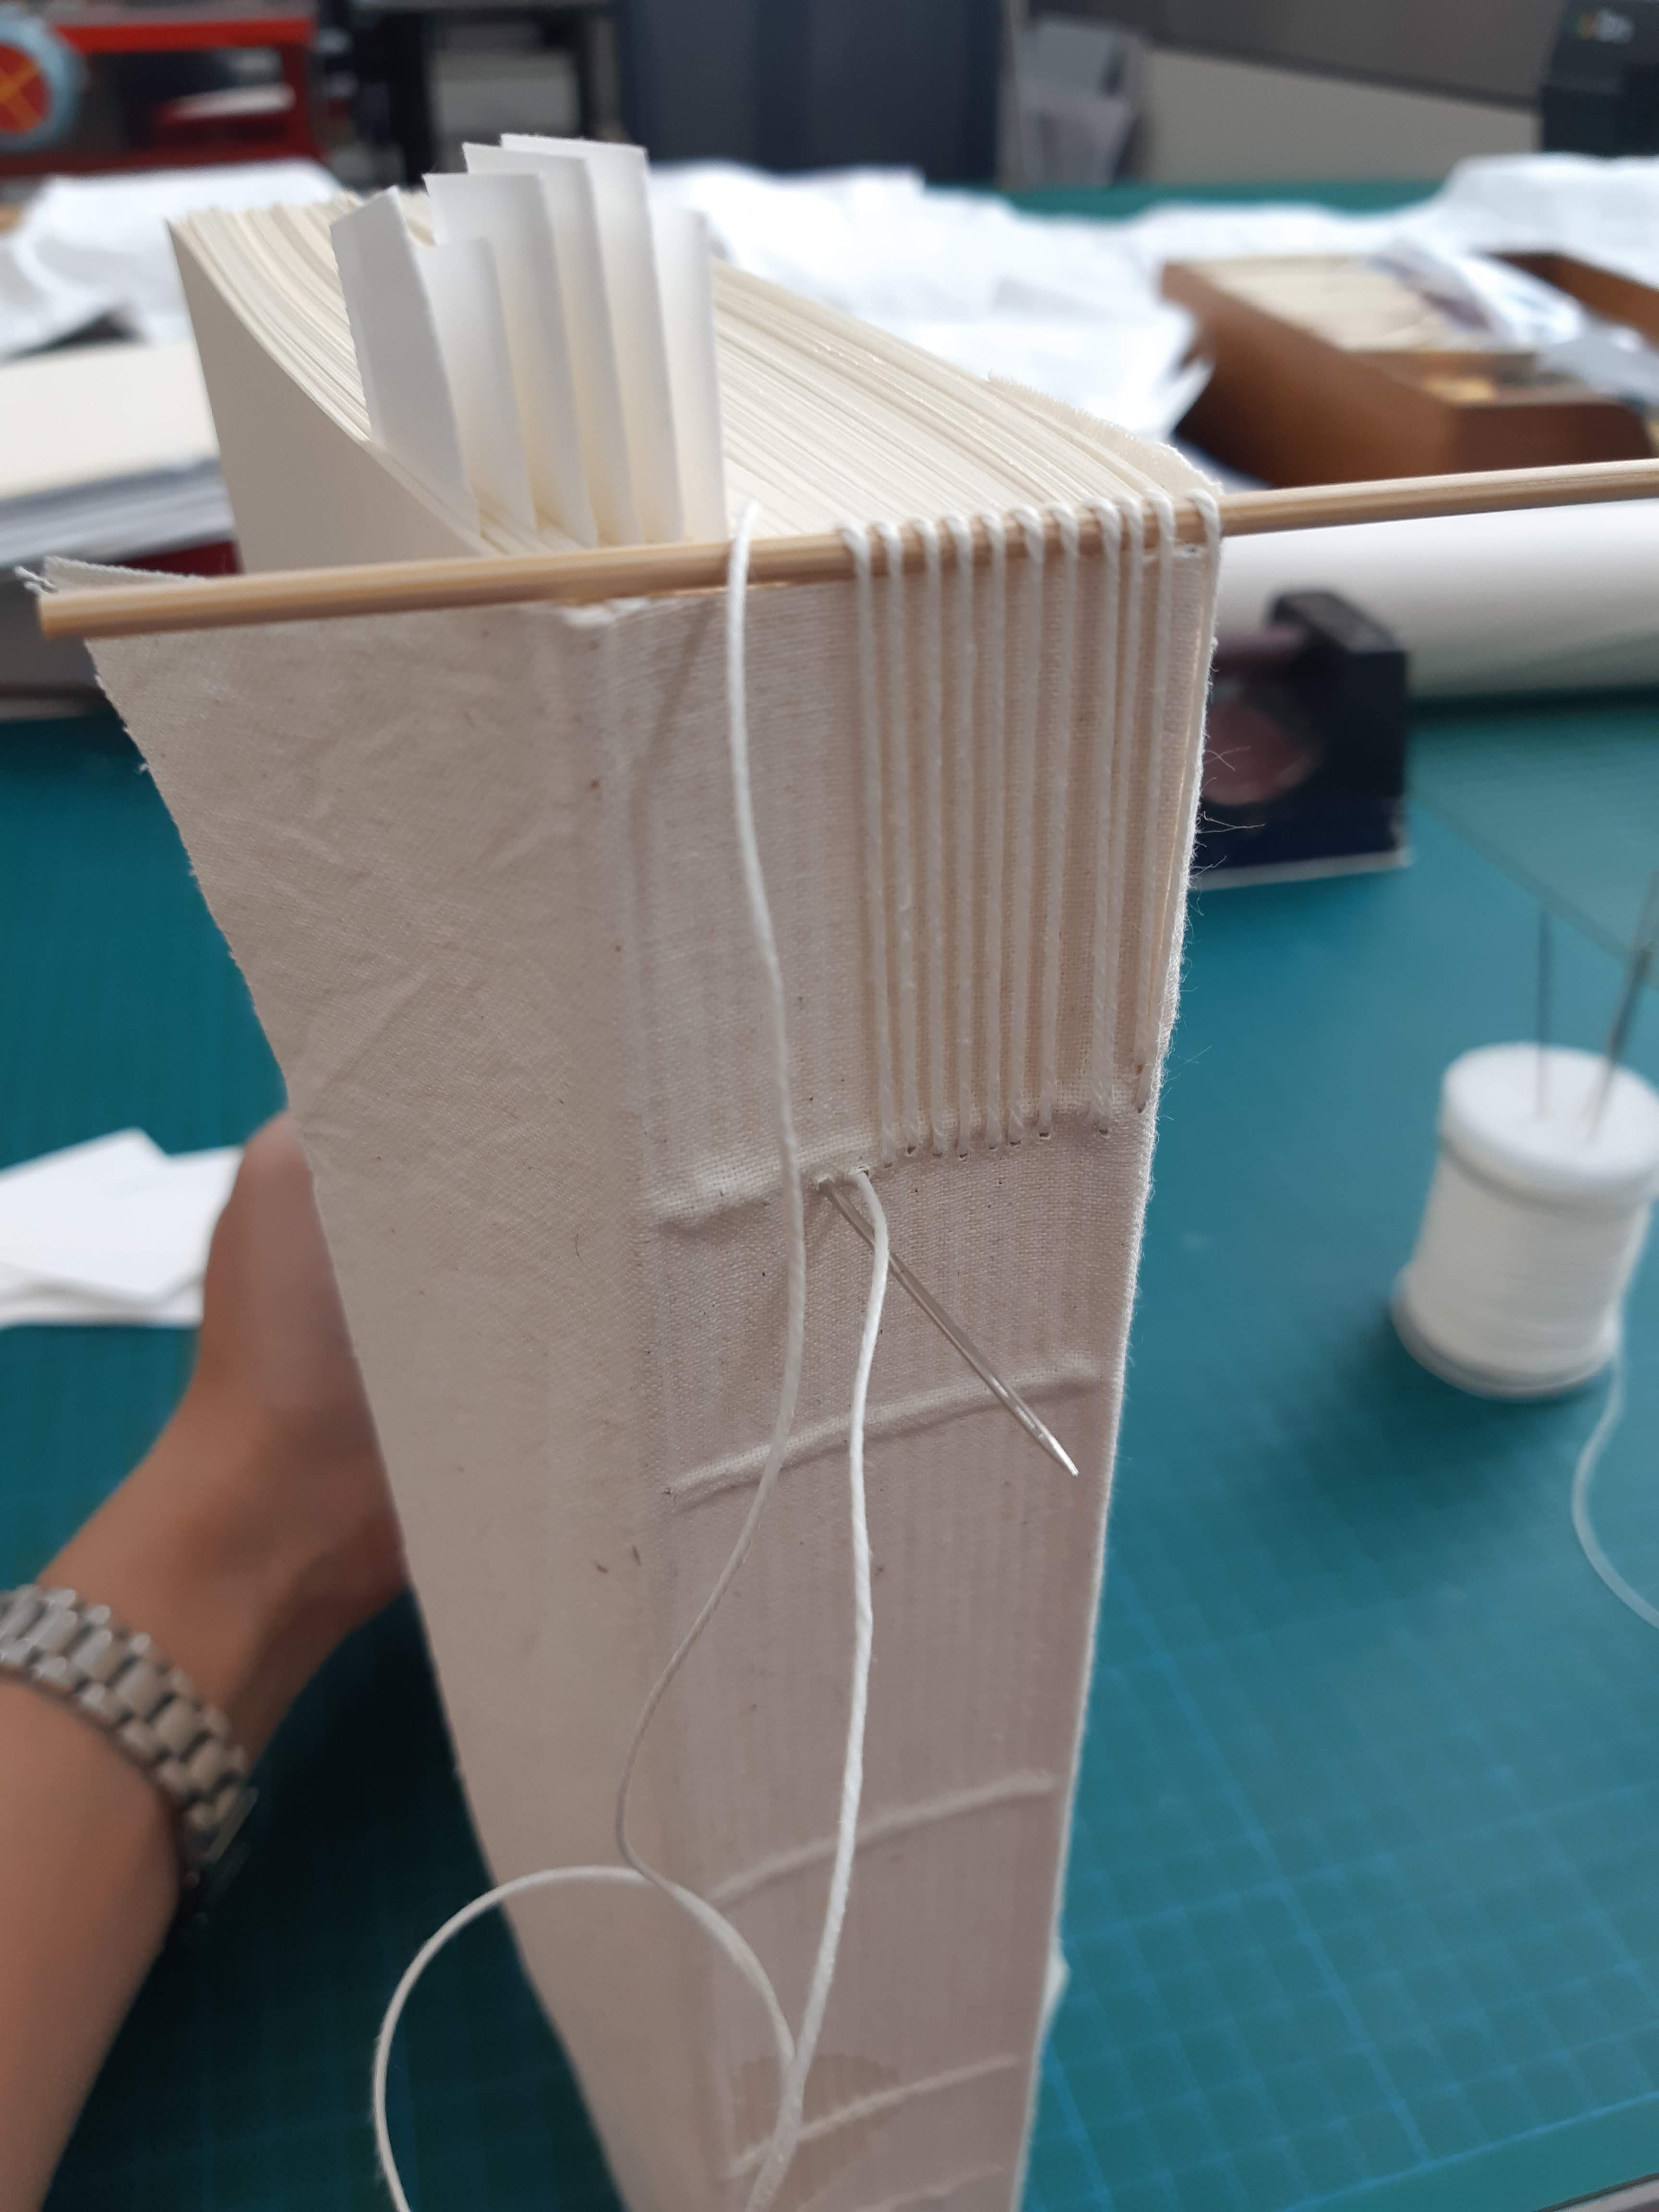 Spine of book model displaying sewing